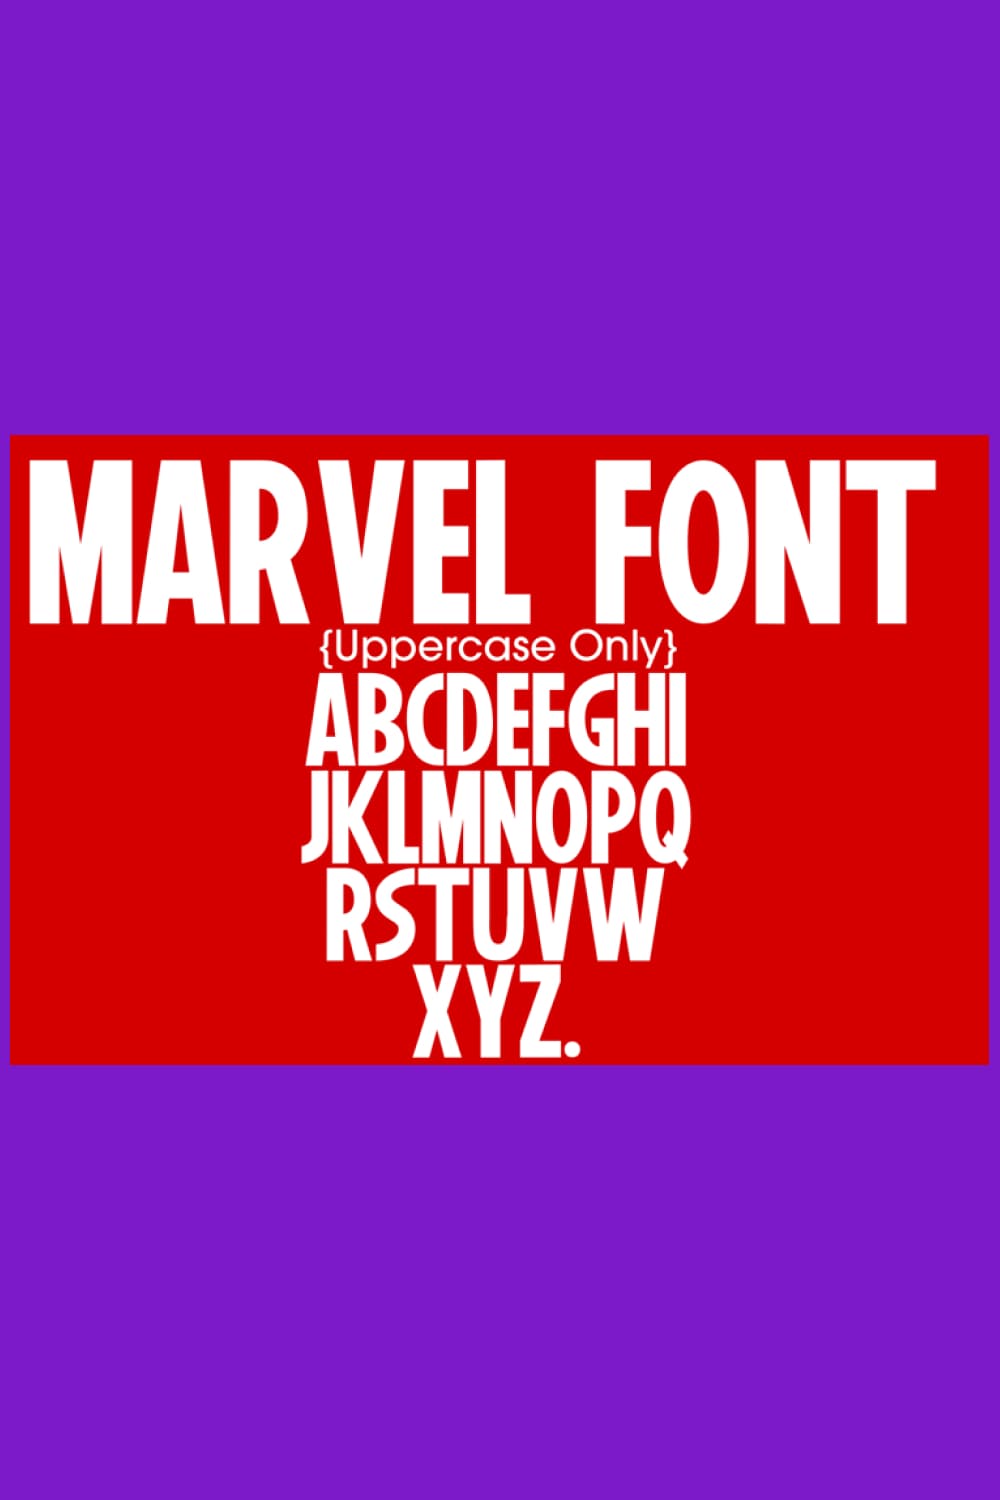 Marvel white font on a red background.